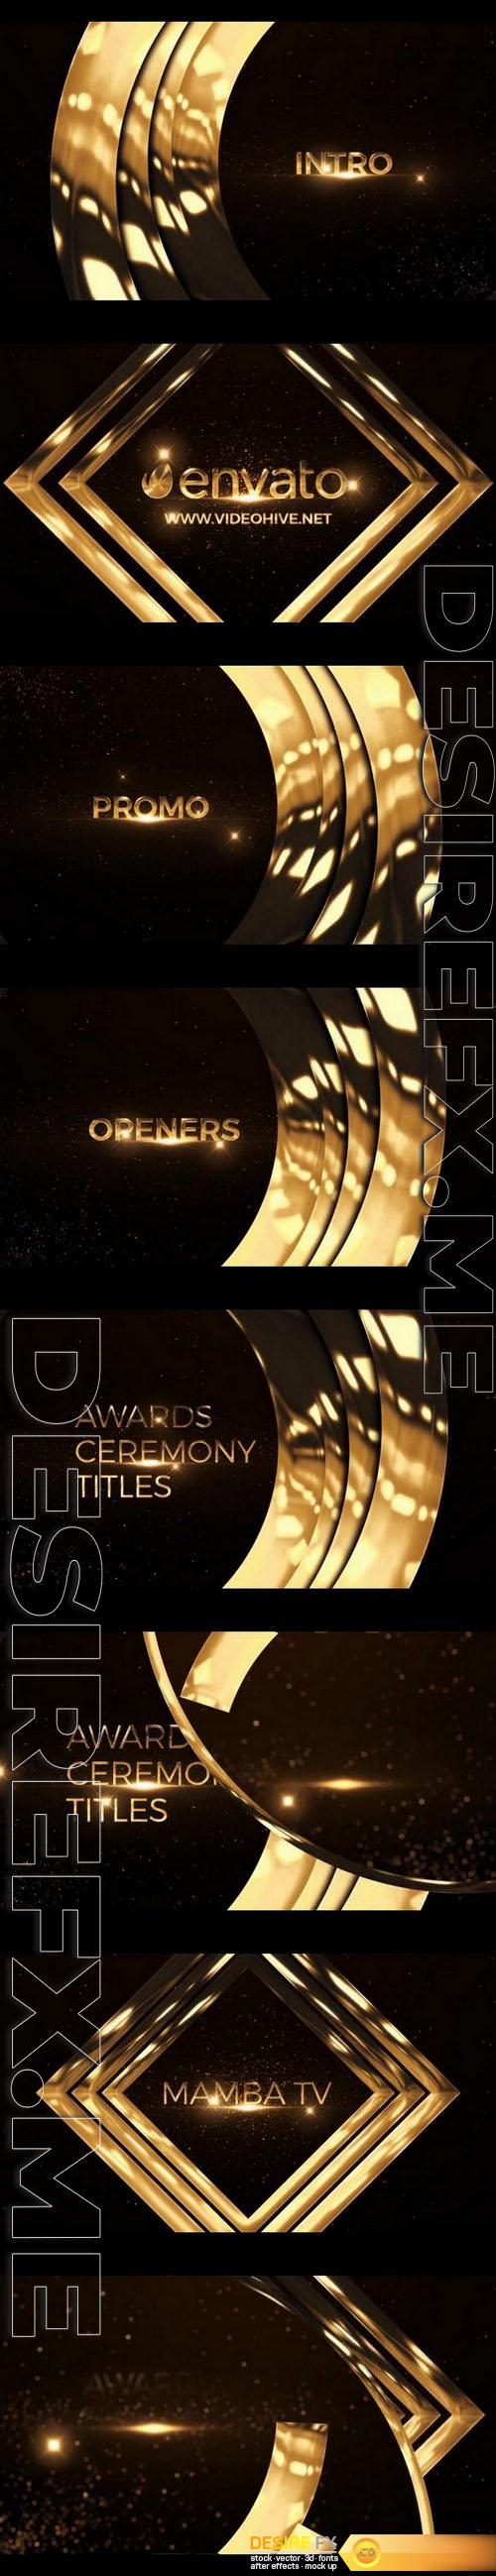 videohive-21010627-awards-ceremony-titles